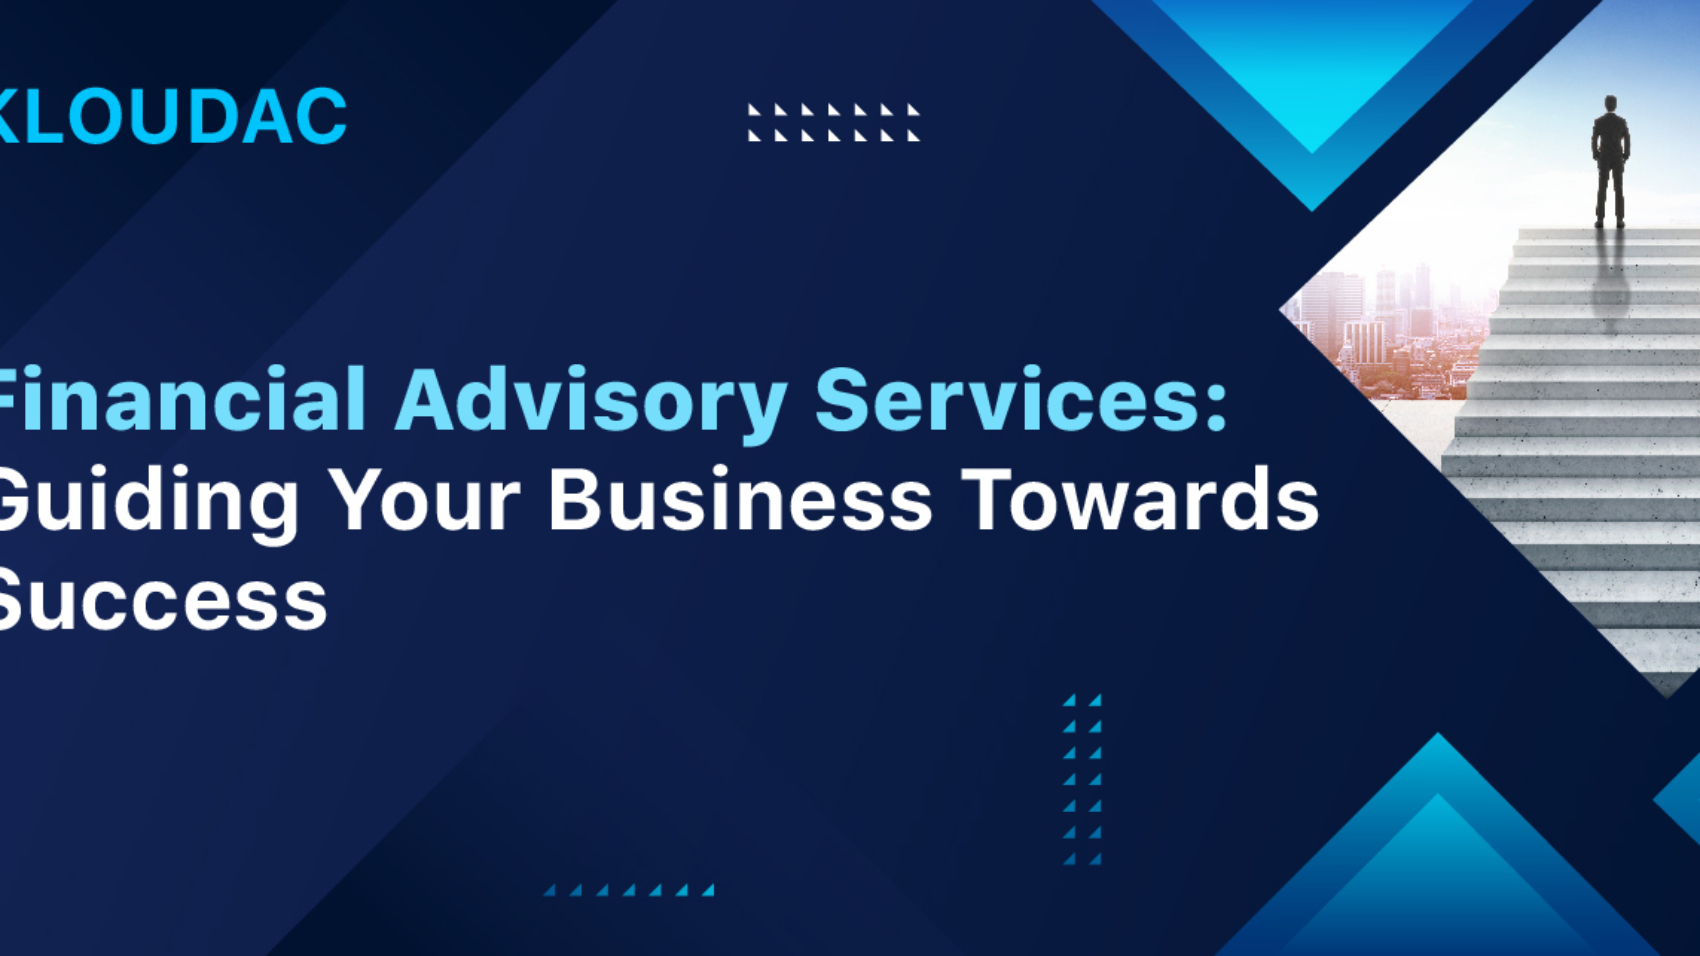 Financial Advisory Services: Guiding Your Business Towards Success